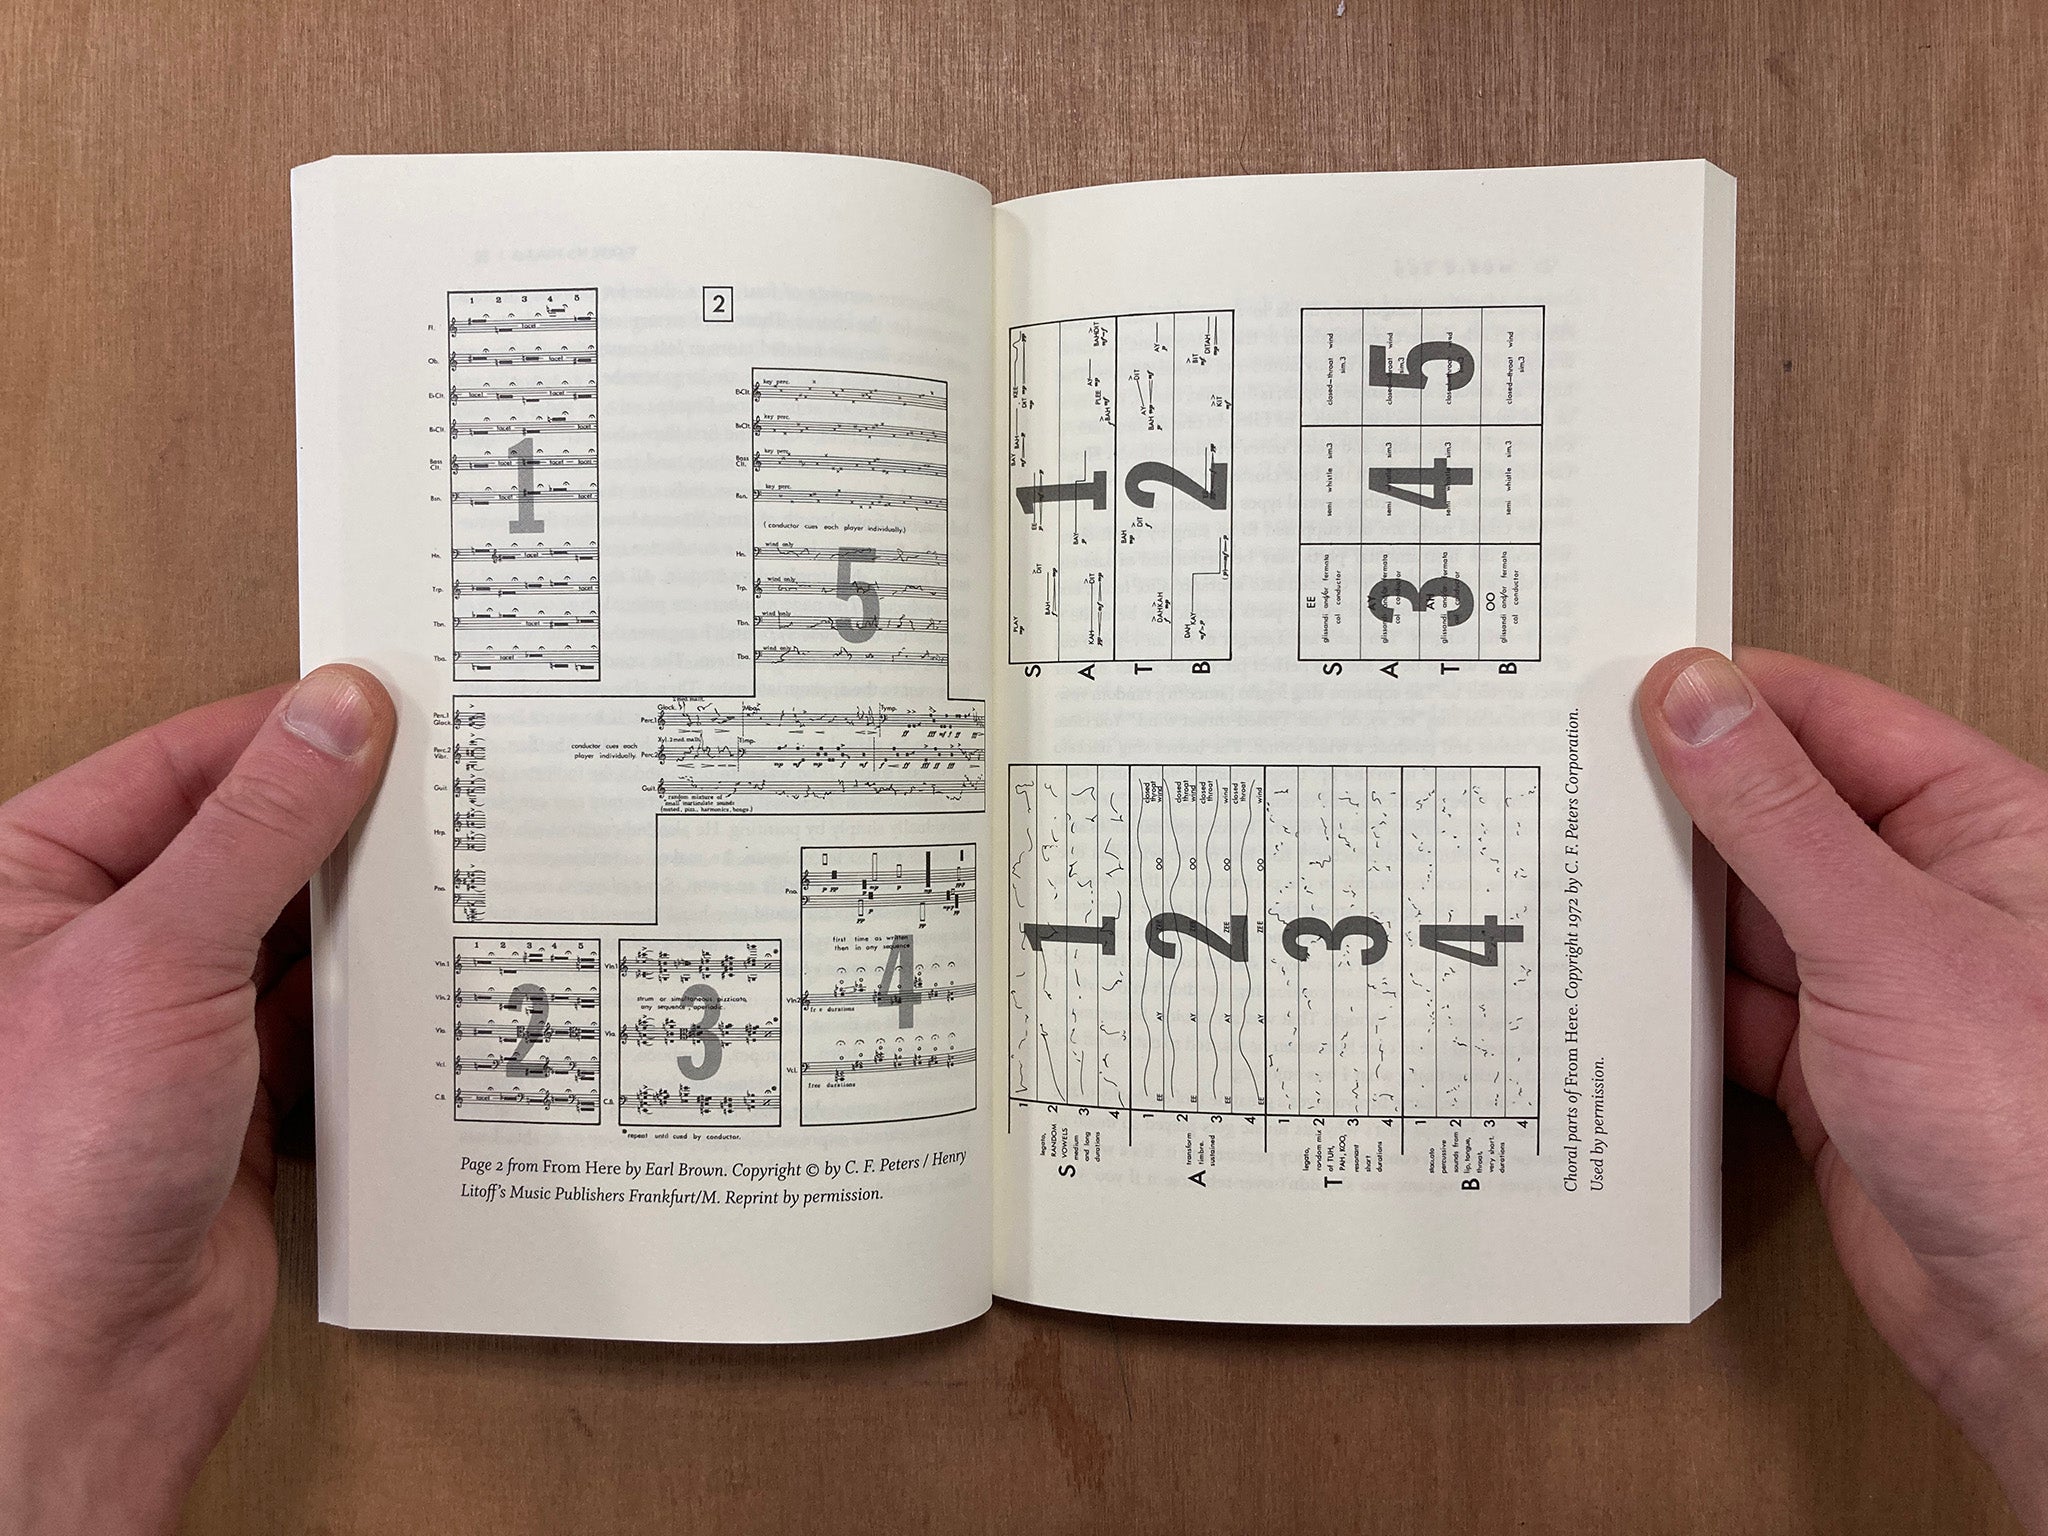 MUSIC 109: NOTES ON EXPERIMENTAL MUSIC by Alvin Lucier